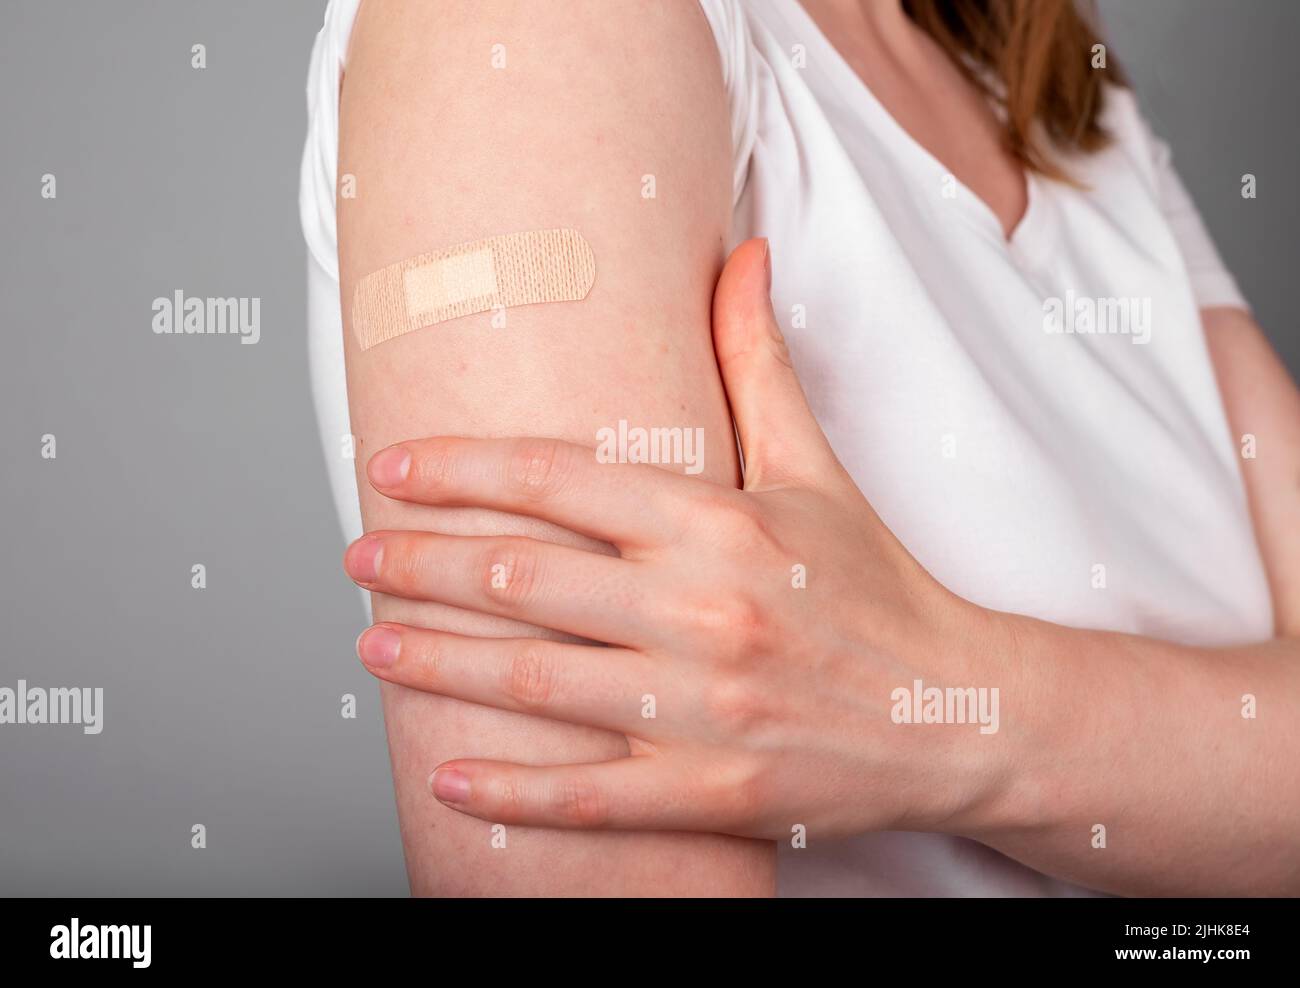 Woman holding shoulder with medical plaster. Vaccination, health care and medicine concept. Vaccinated person receiving flu or Coronavirus vaccine. High quality photo Stock Photo